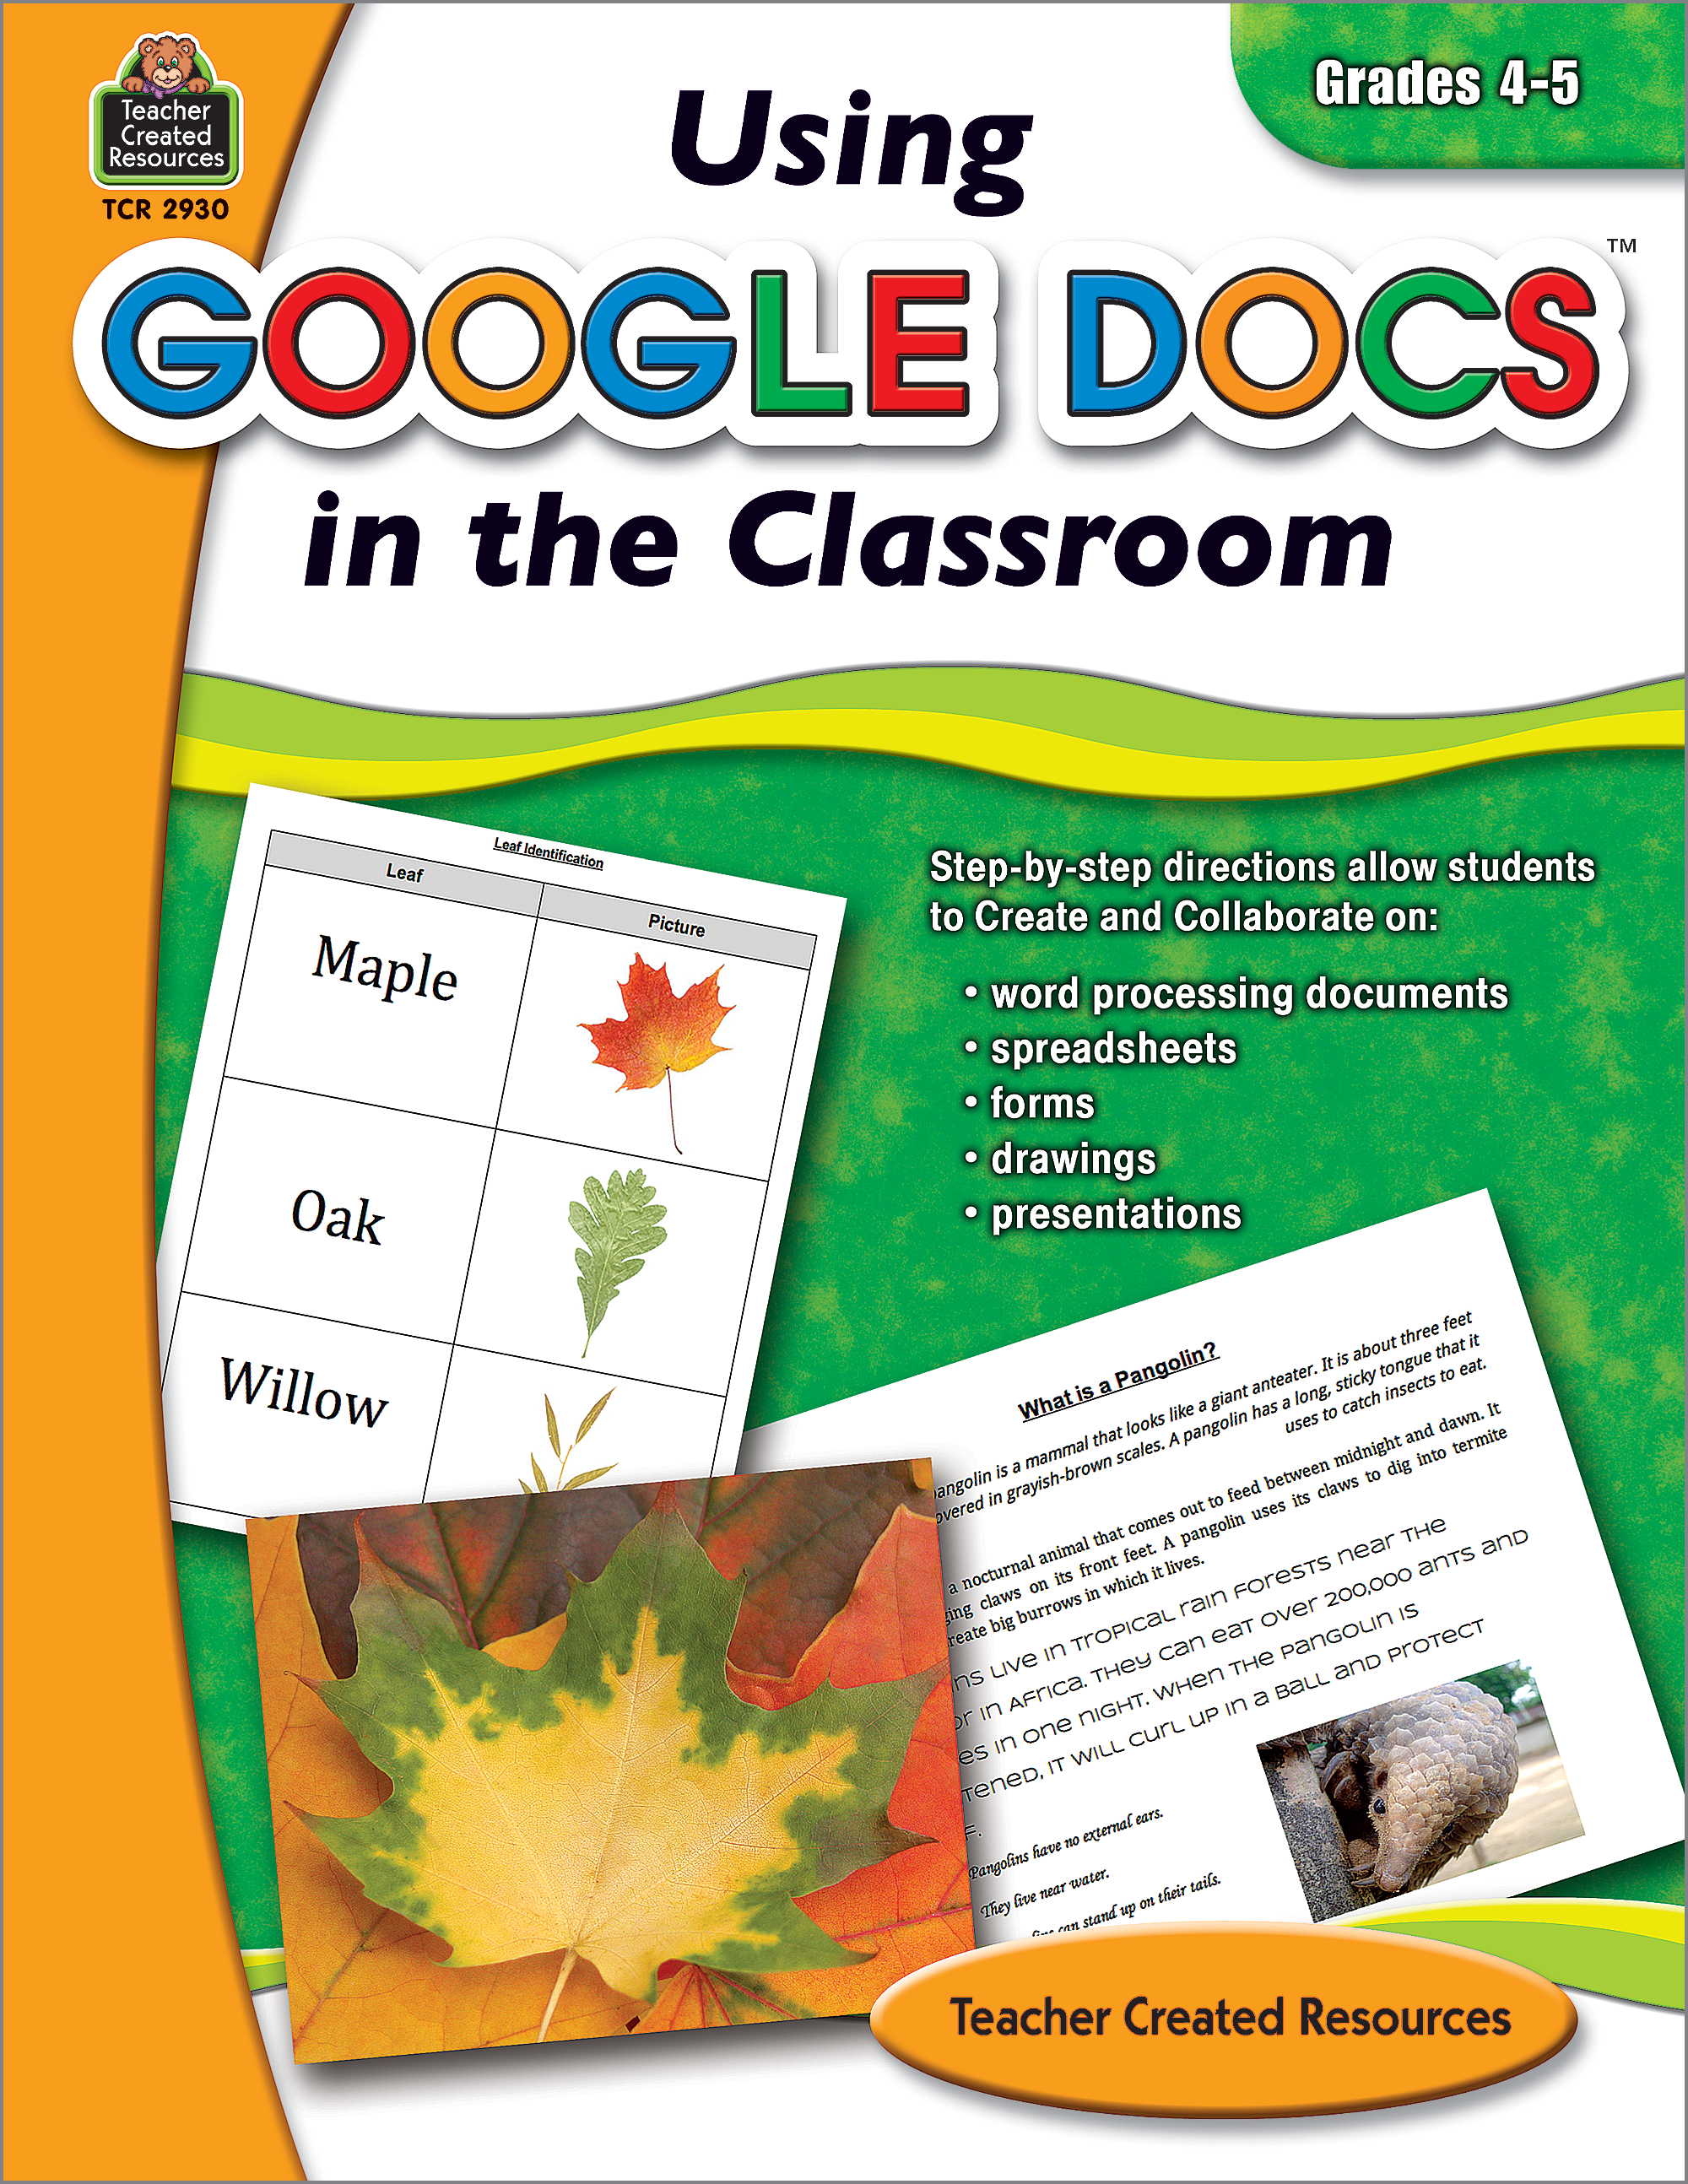 Using Google Docs in the Classroom Grade 4-5 - TCR2930 | Teacher Created Resources